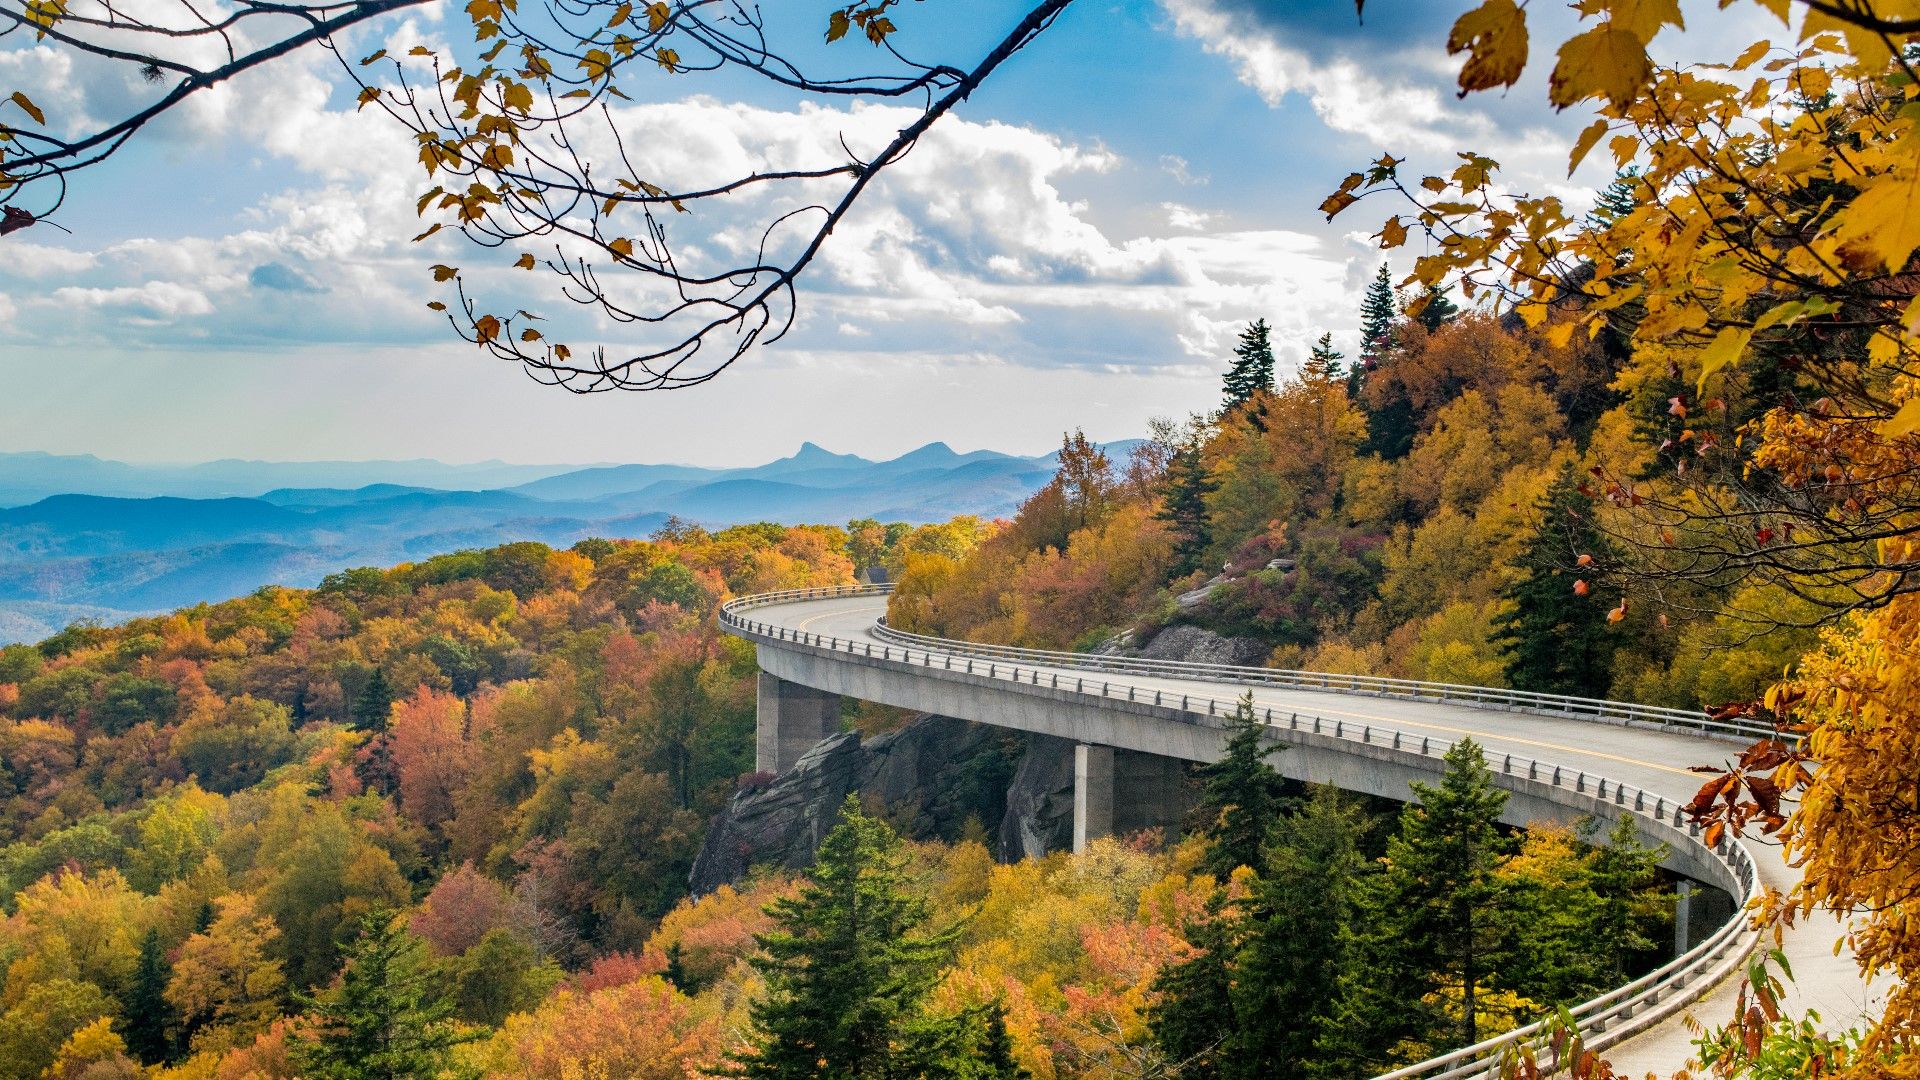 Best Places To View The Fall Colors Along The Blue Ridge Mountains Down To The Milepost!